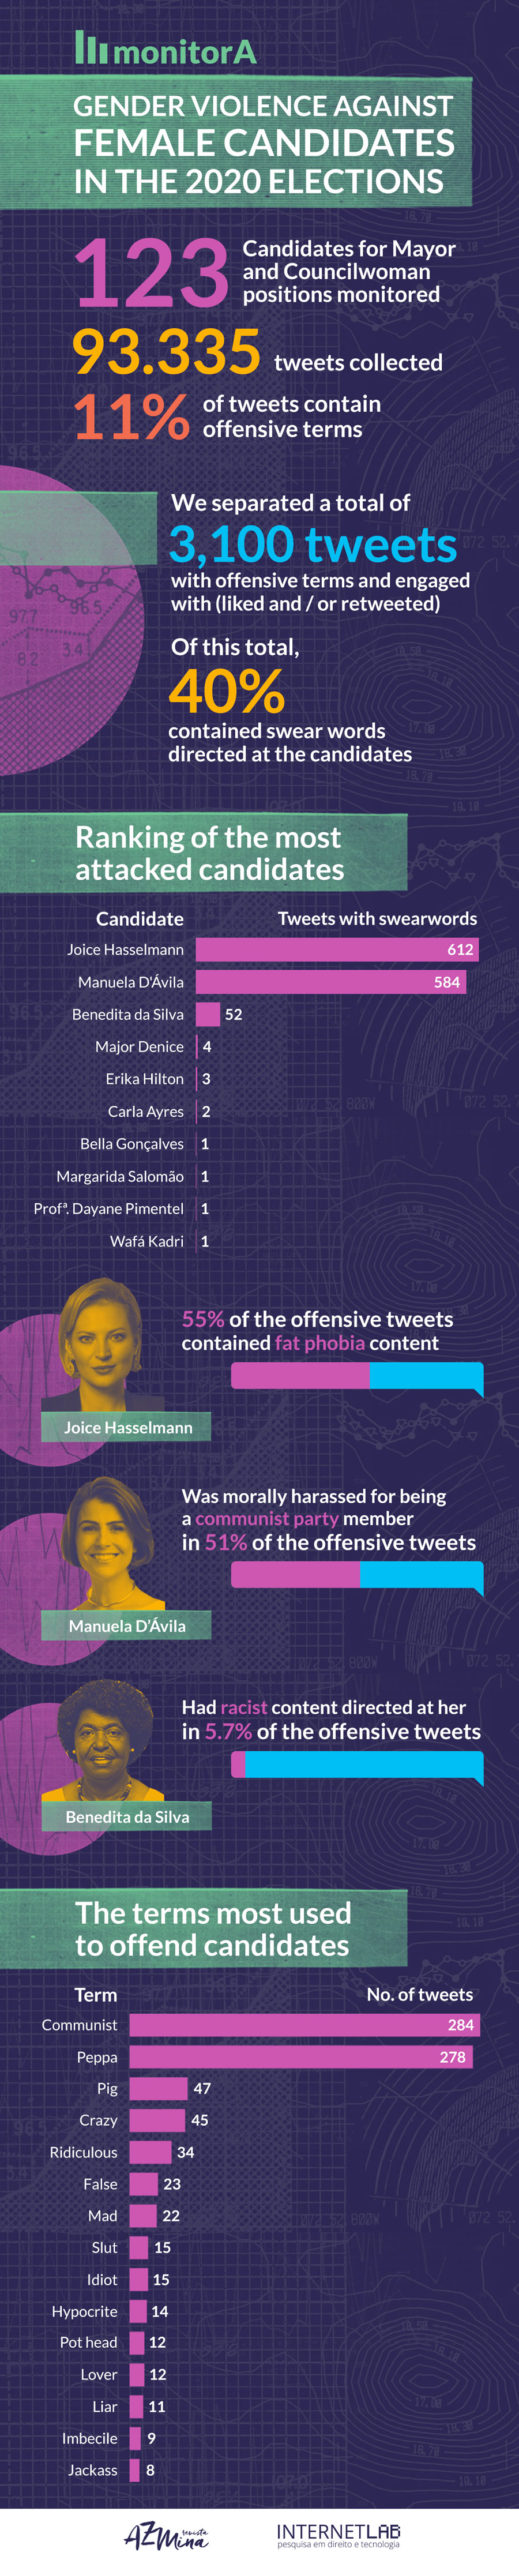 Image of the monitorA project with information about gender violence against candidates in the 2020 elections. According to the image, 123 candidates for mayor and council were monitored. Of the 93,335 tweets collected, 11% of the tweets had offensive terms. A total of 3,100 tweets that had some type of engagement were separated, of this total 40% were curses directed at the candidates. The image also shows the ranking of the most attacked candidates. Among them are Joice Hasselmann, Manuela D'ávila, Benedita da Silva, Major Denice, Erika Hilton and Carla Ayres.